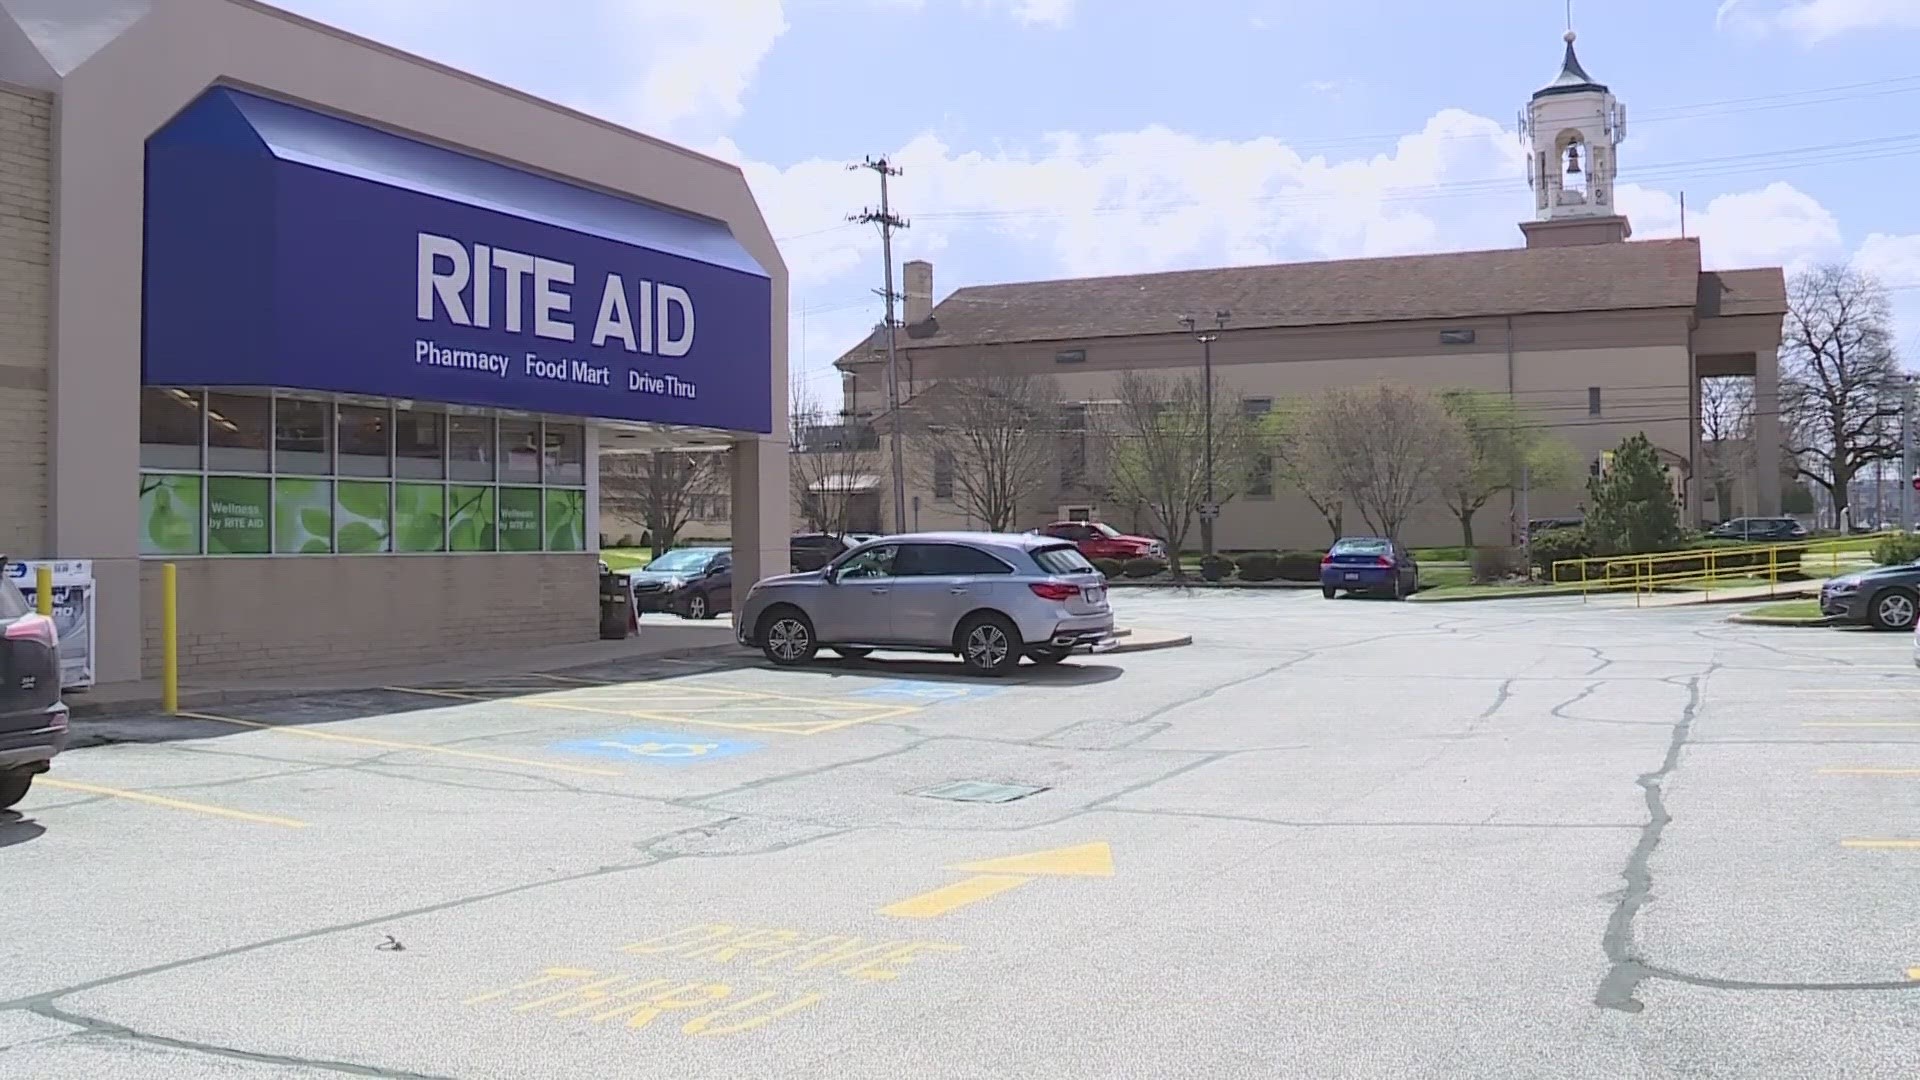 Rite Aid announced 154 stores were closing last month as part of its Chapter 11 bankruptcy filing.